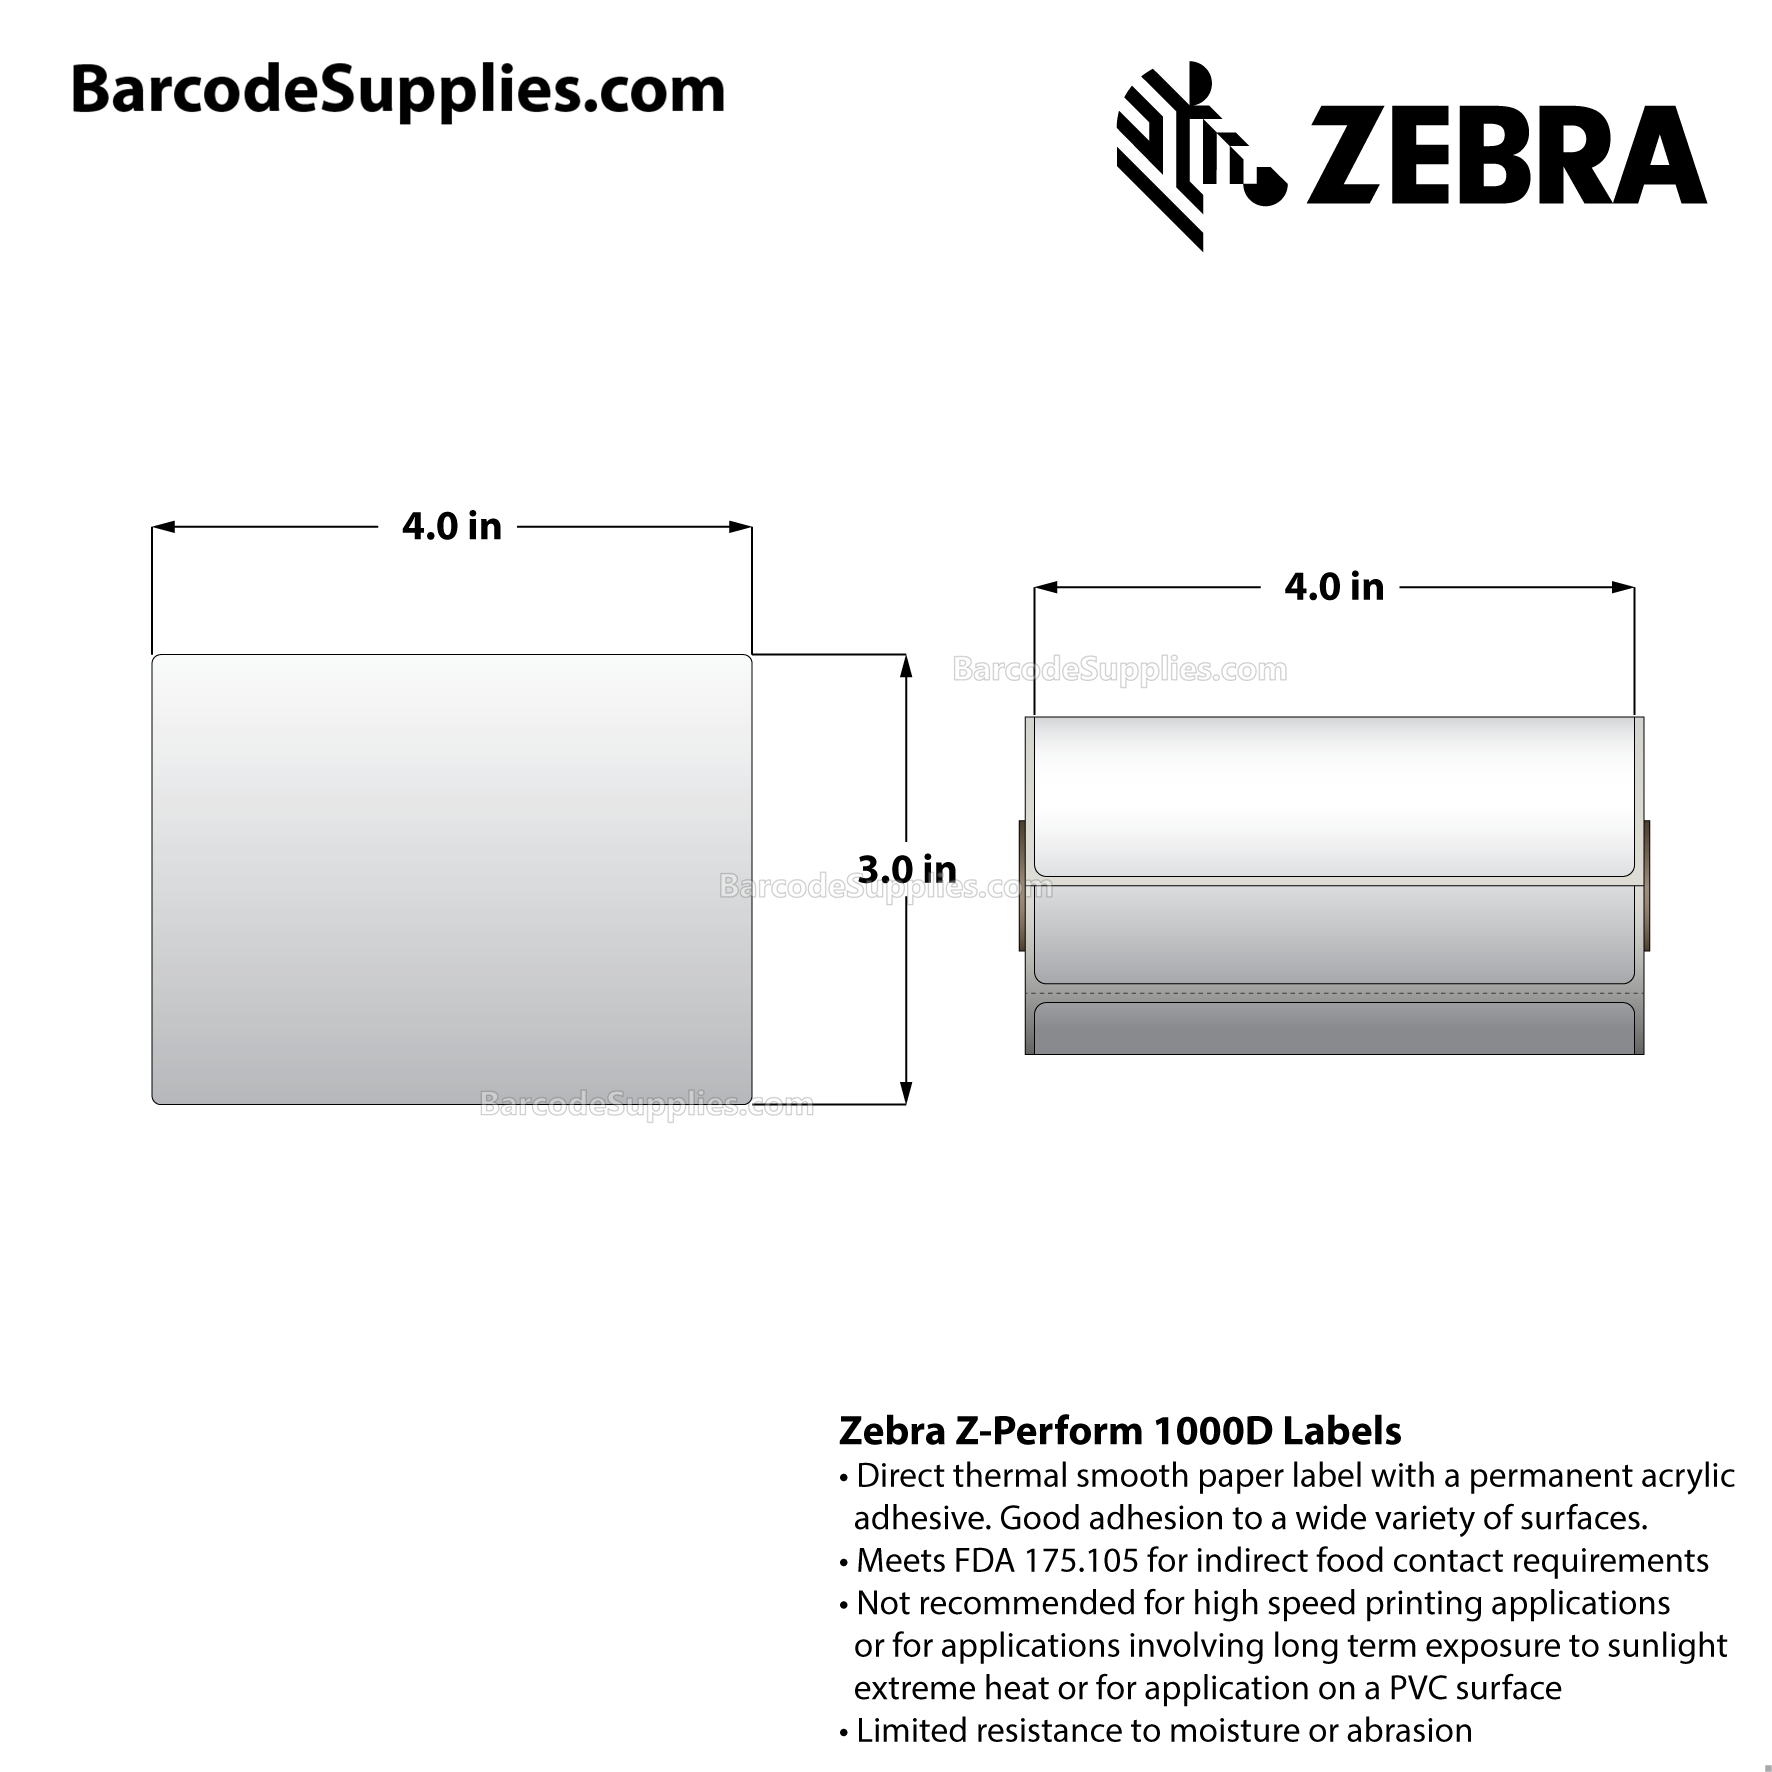 4 x 3 Direct Thermal White Z-Perform 1000D Labels With Permanent Adhesive - Perforated - 155 Labels Per Roll - Carton Of 36 Rolls - 5580 Labels Total - MPN: 10026373